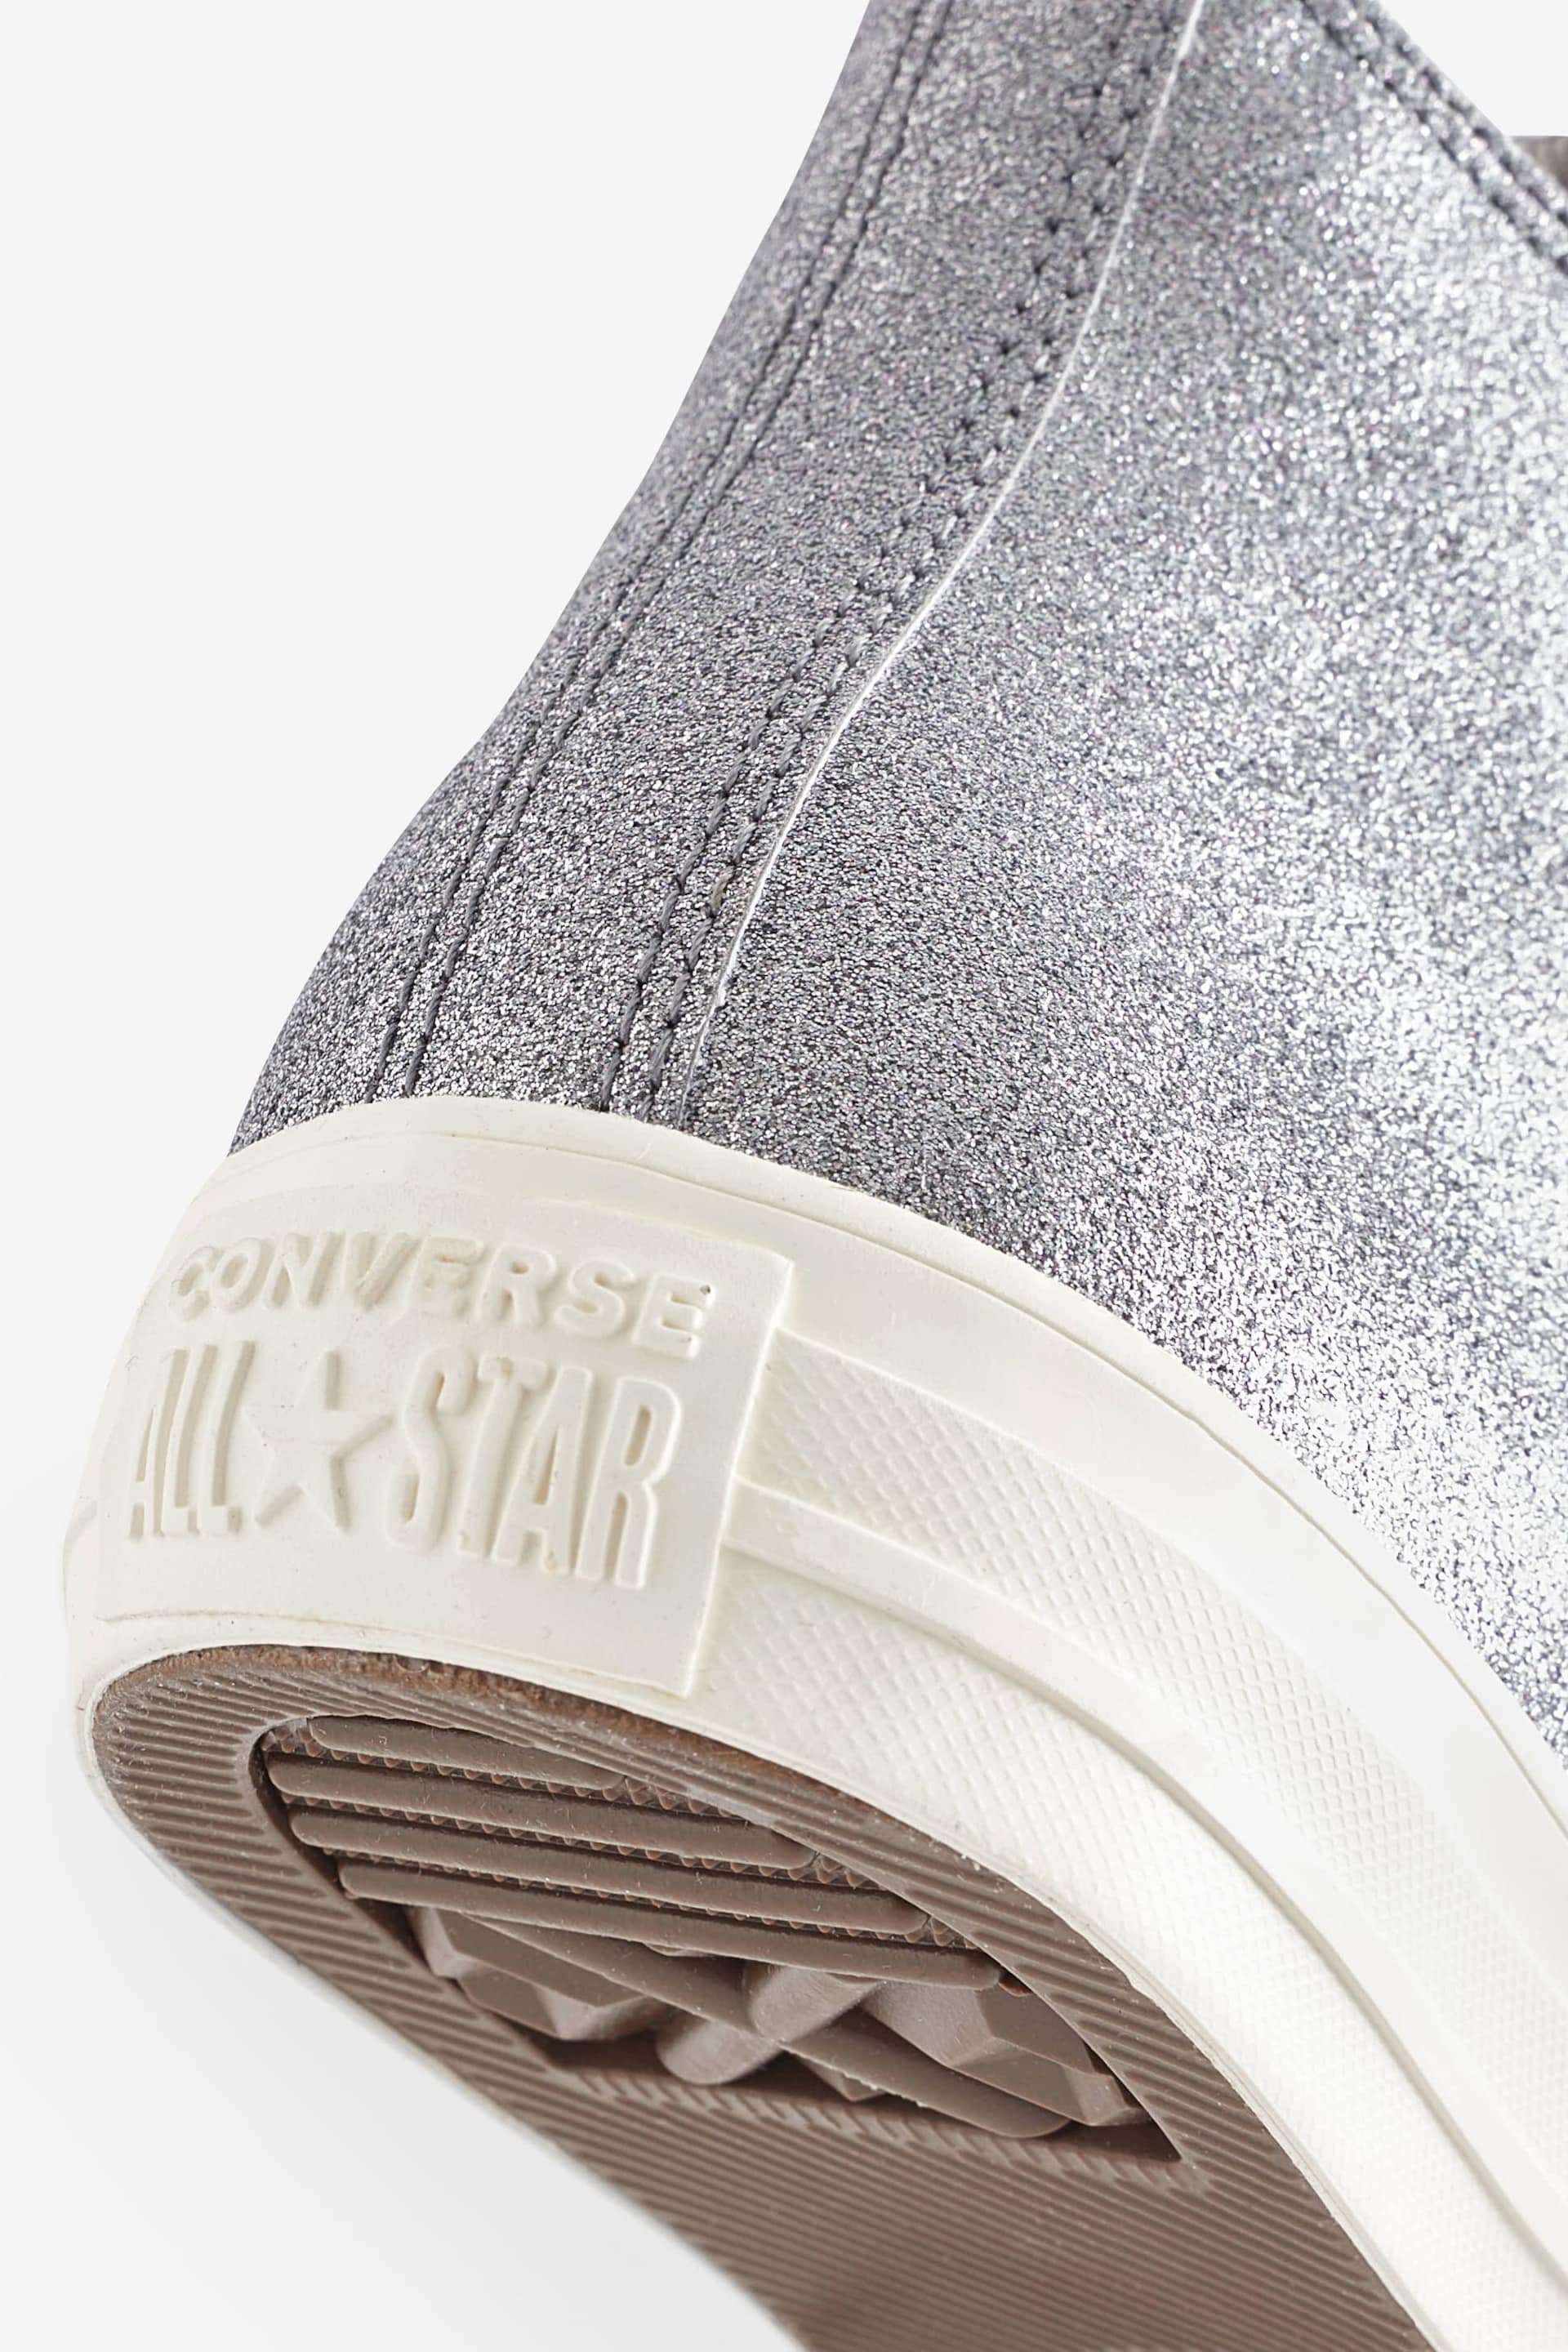 Converse Silver Silver Glitter High Top Trainers - Image 9 of 9